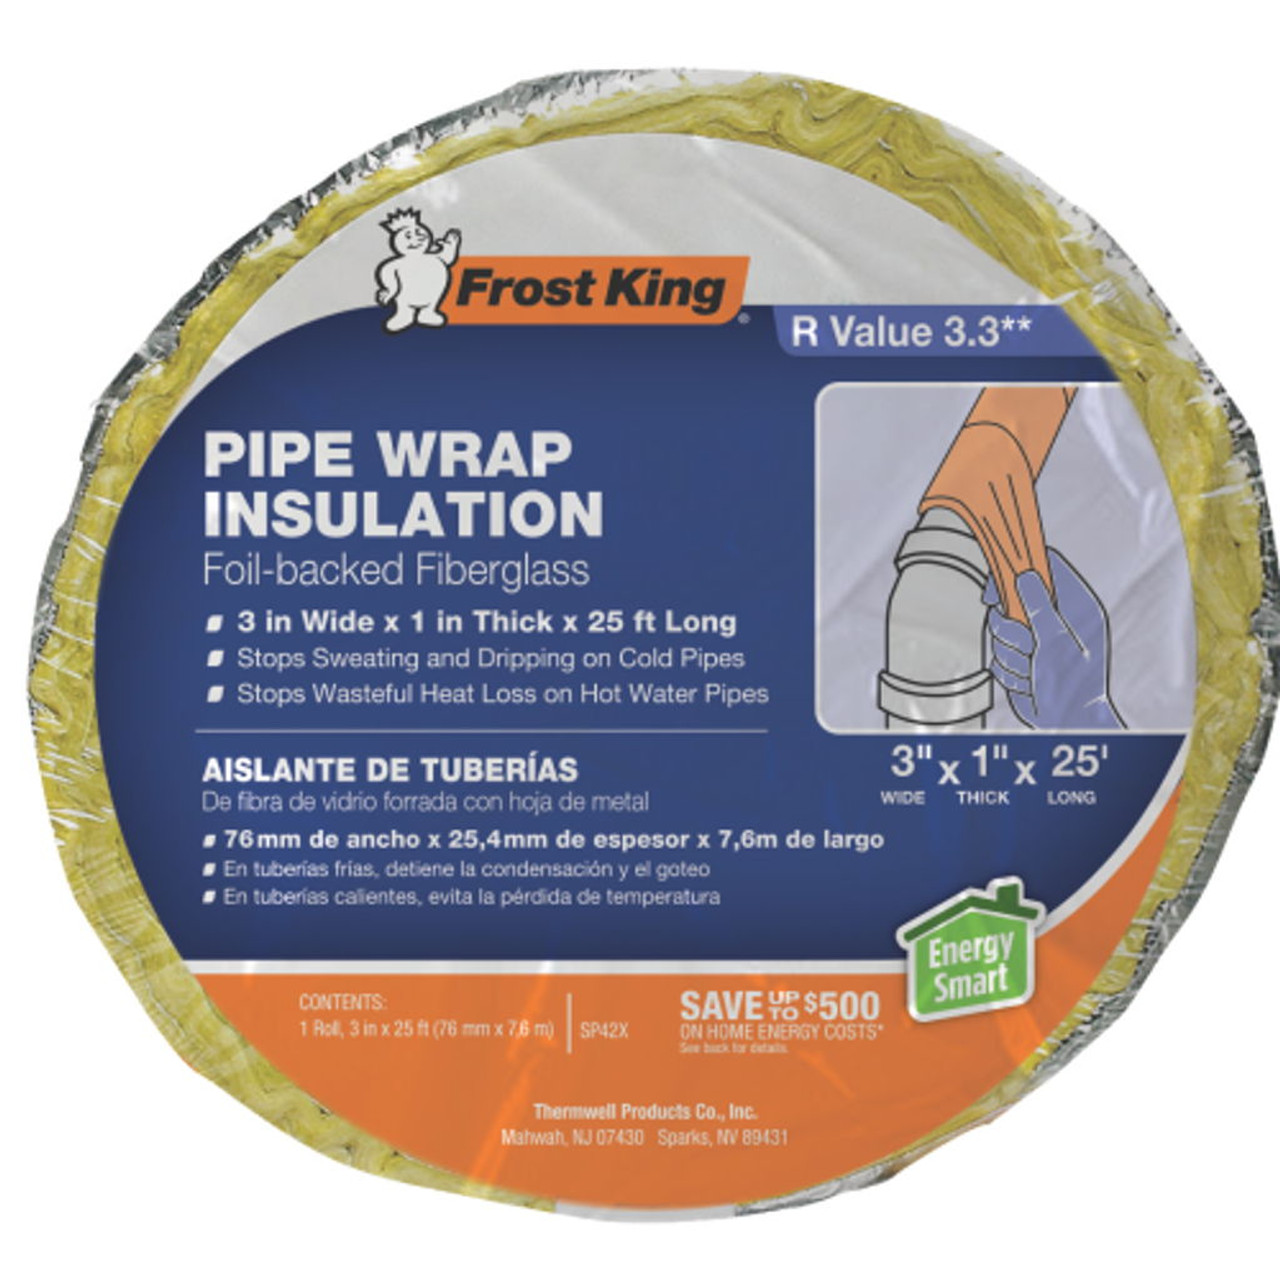 Frost King 3-ft Fiberglass Tubular Pipe Insulation in the Pipe